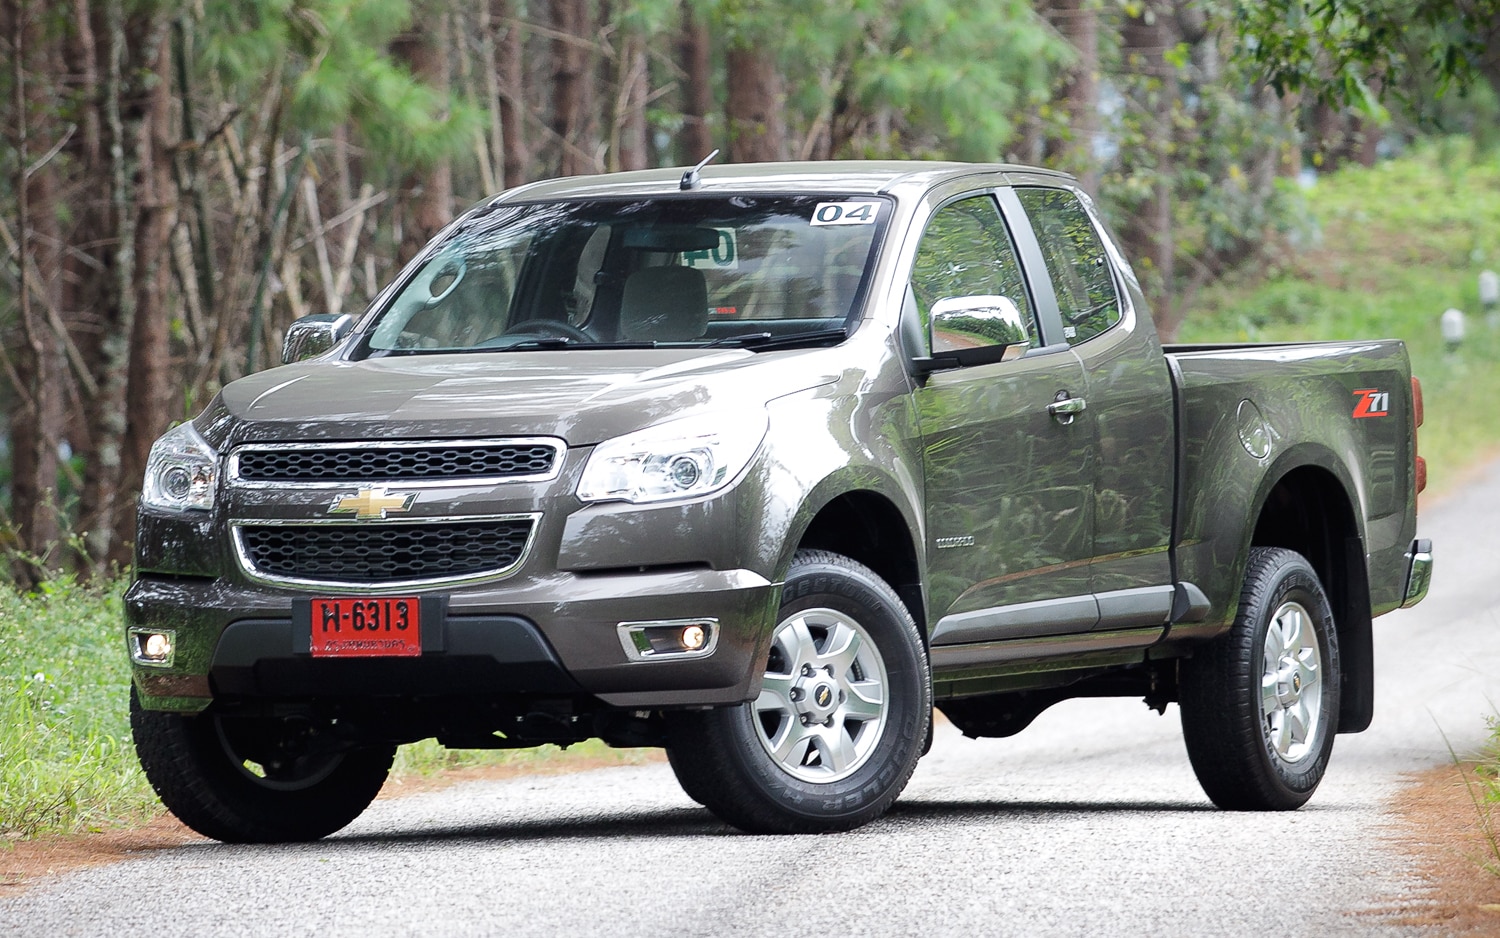 First Drive: 2012 Chevrolet Colorado Global Edition